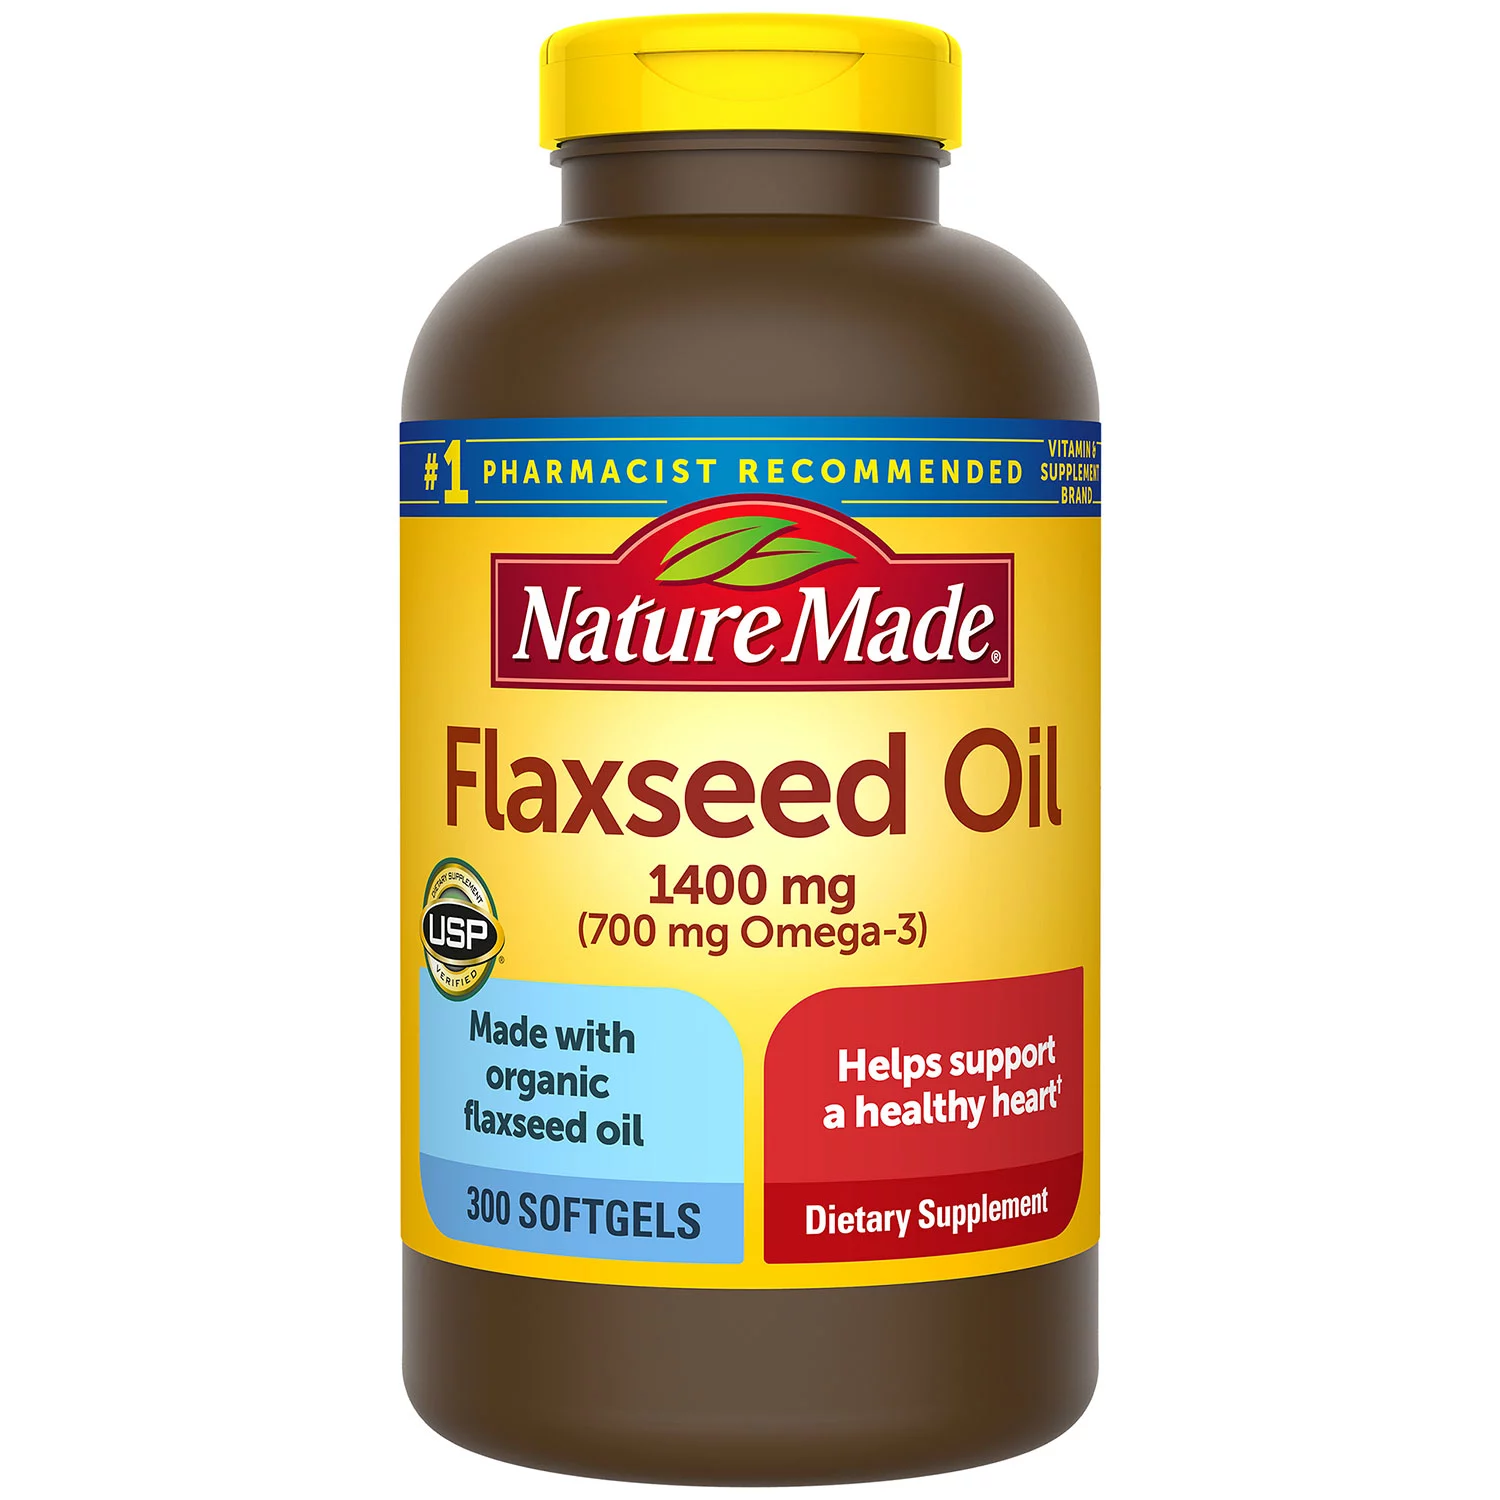 Nature Made Flaxseed Oil, 1400 mg Softgels, for Heart Health (300 ct.)